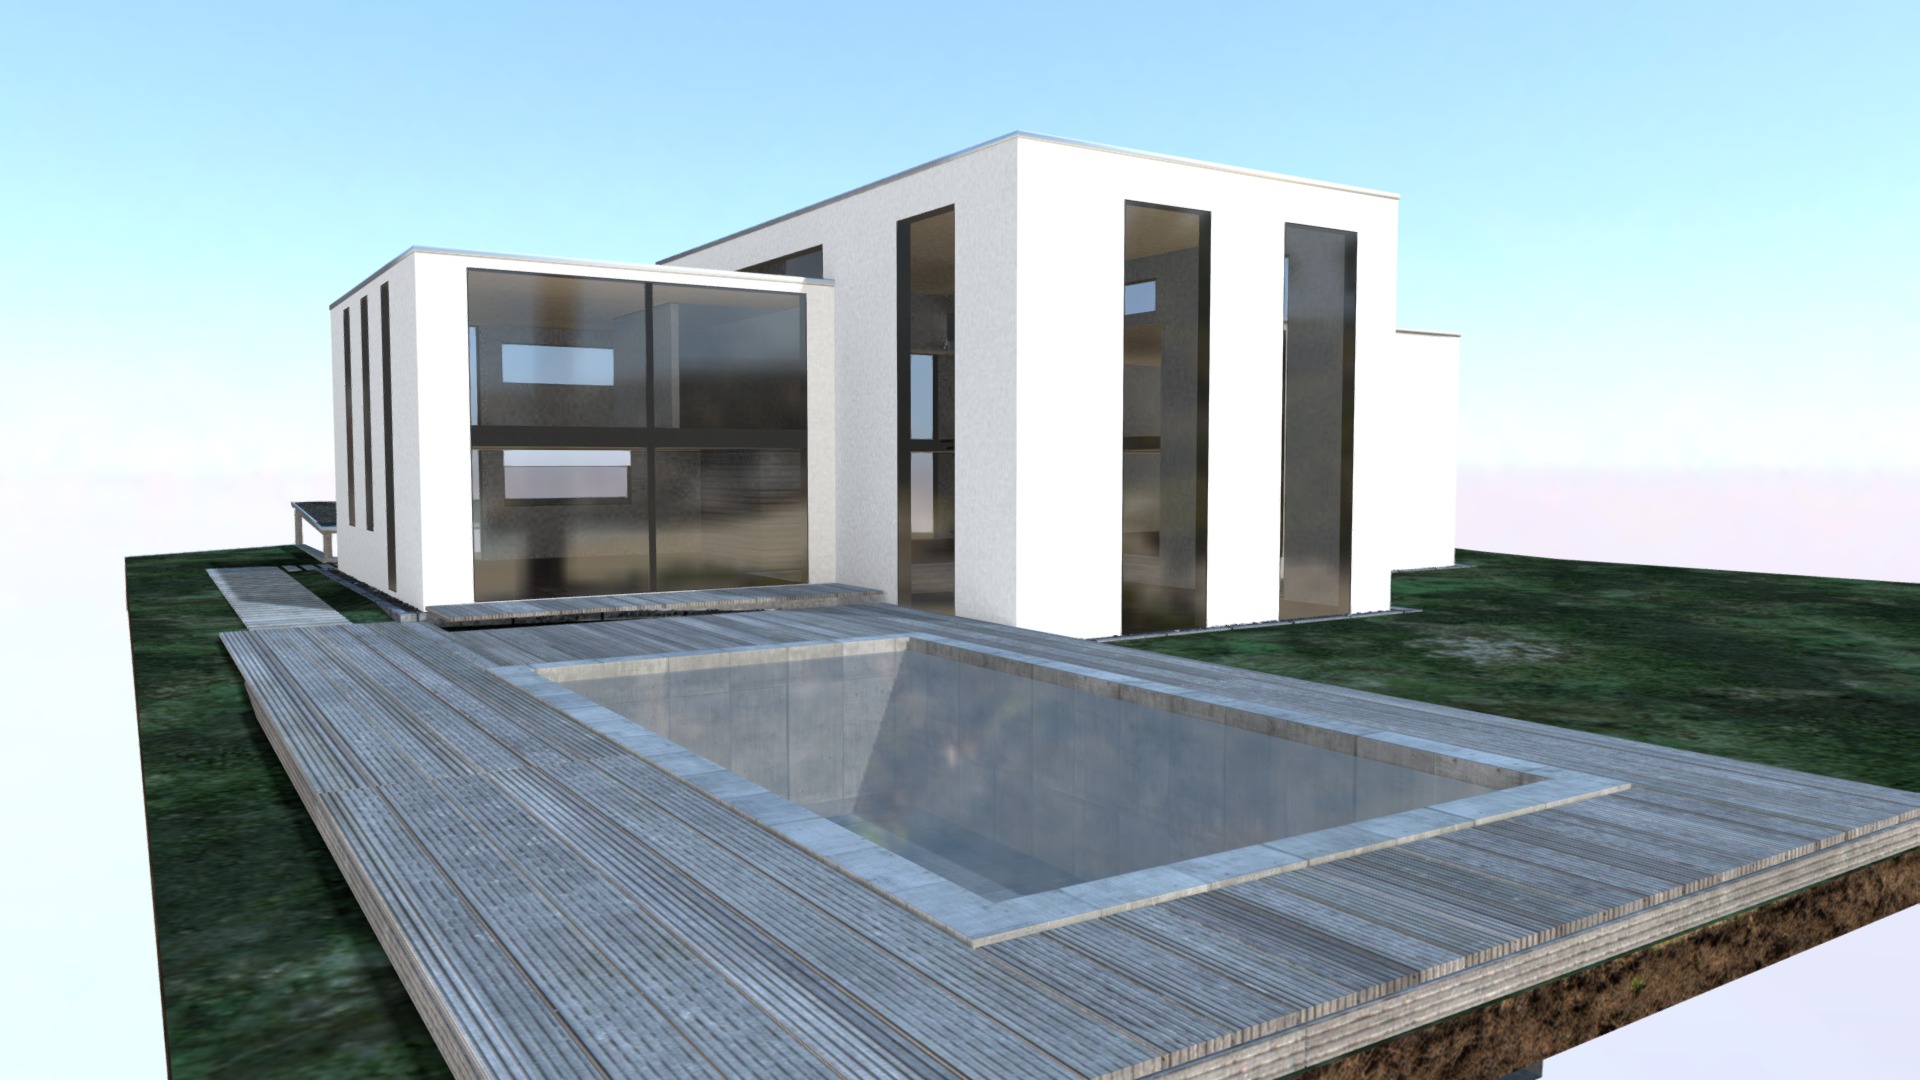 3D model architectural visualisation - This is a 3D model of the architectural visualisation. The 3D model is about a building with a pool.